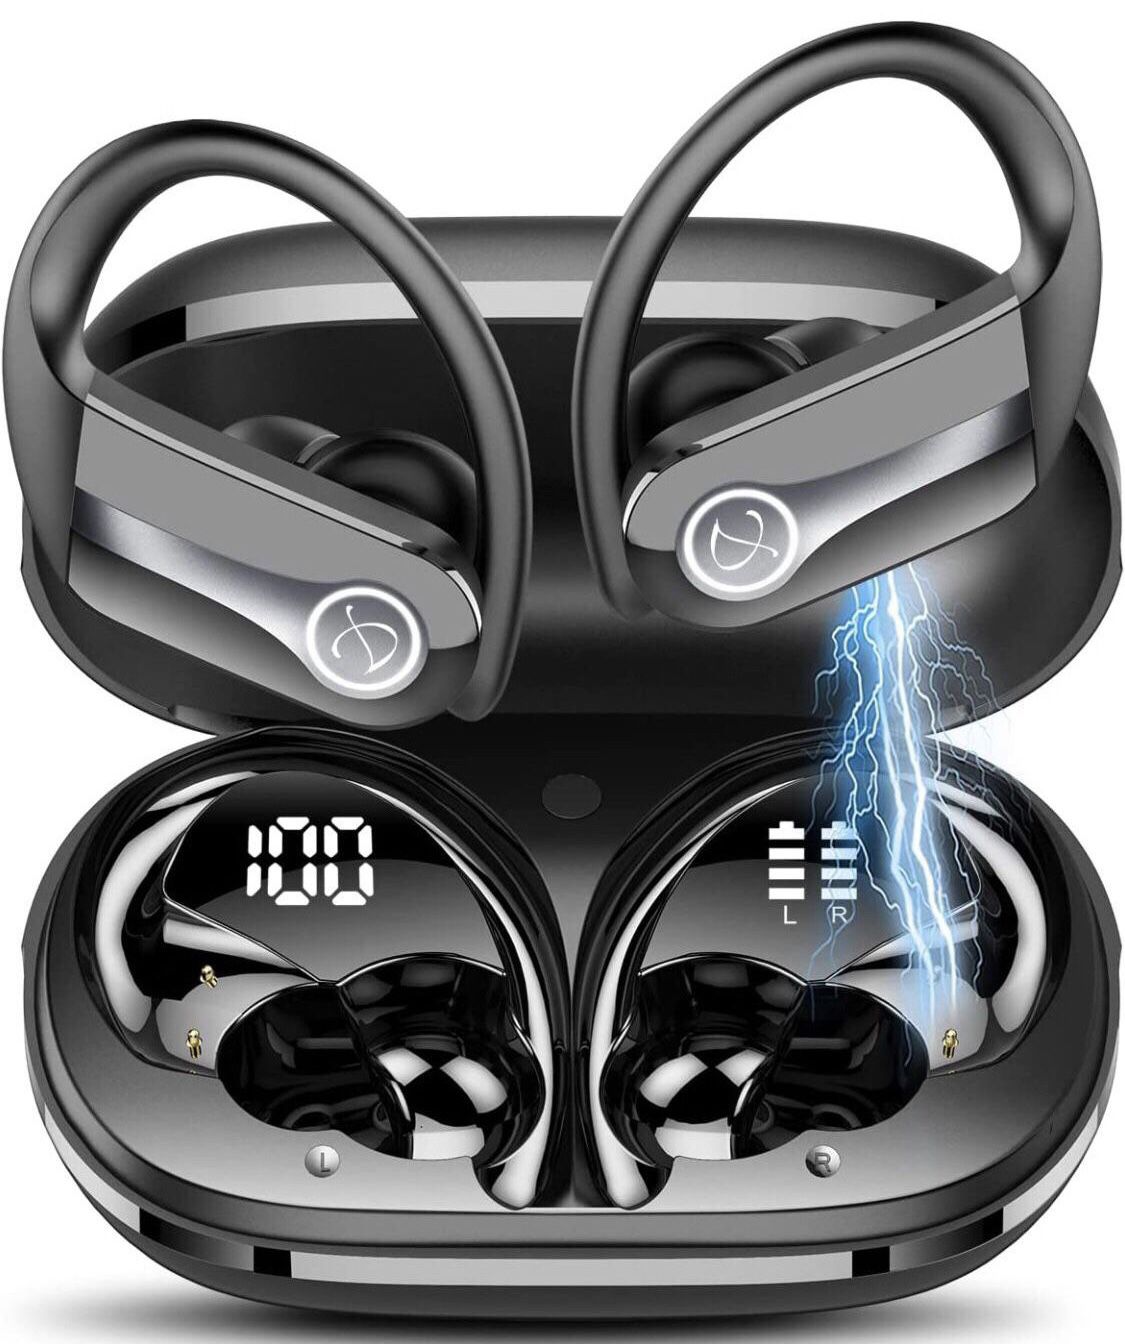  Wireless Earbuds Bluetooth 5.3 Headphones 50Hrs Playtime Sports Earphones Over-Ear Earhooks Headset with LED Display, ENC Mic, IP7 Waterproof for Wor